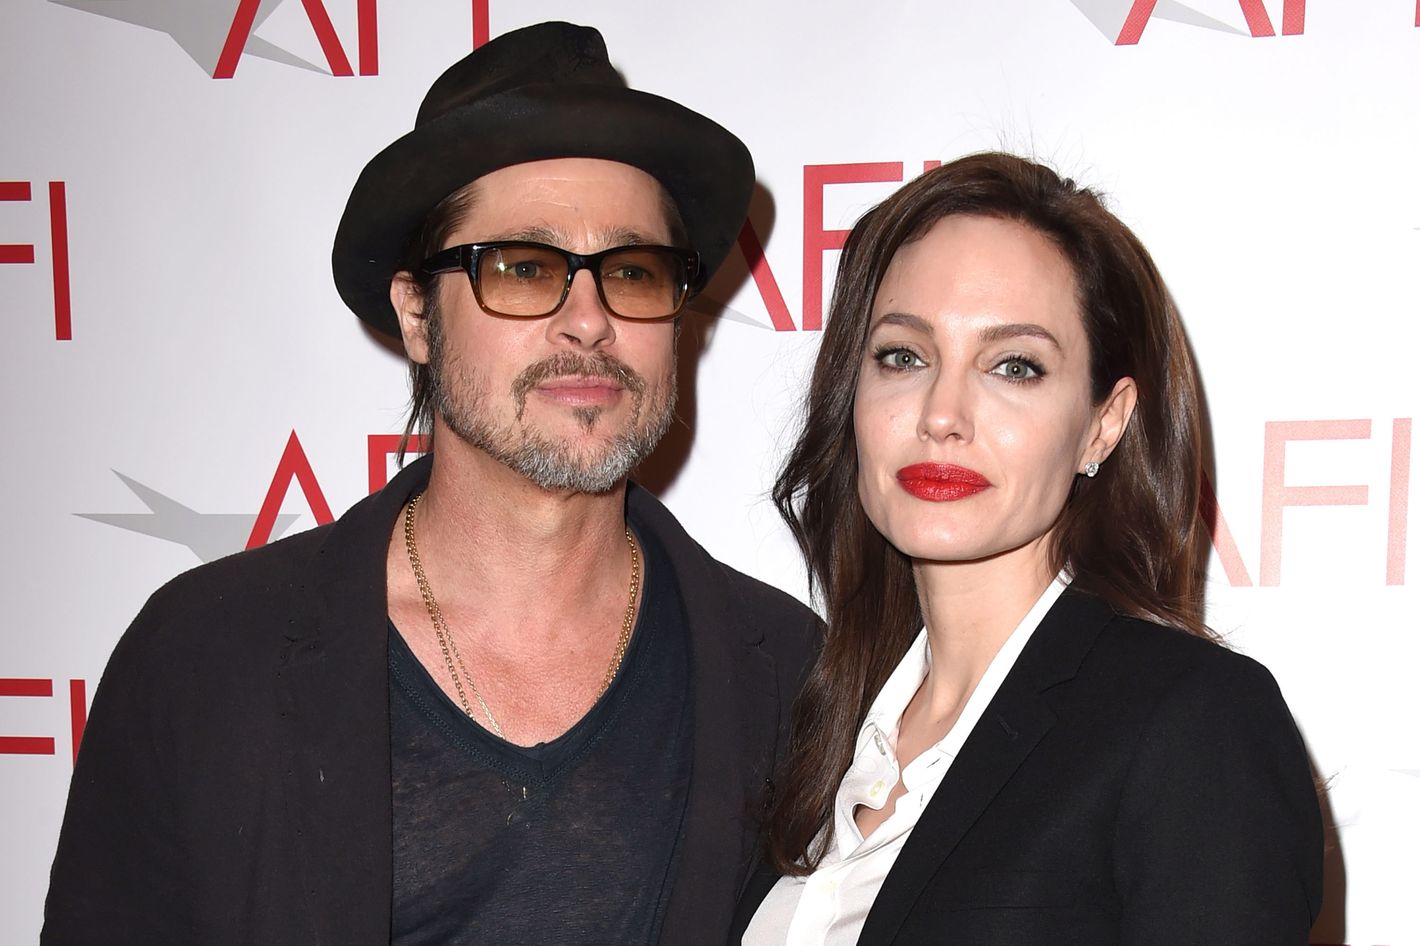 If Brangelina broke up over marijuana, what could it mean for their  divorce?, Angelina Jolie